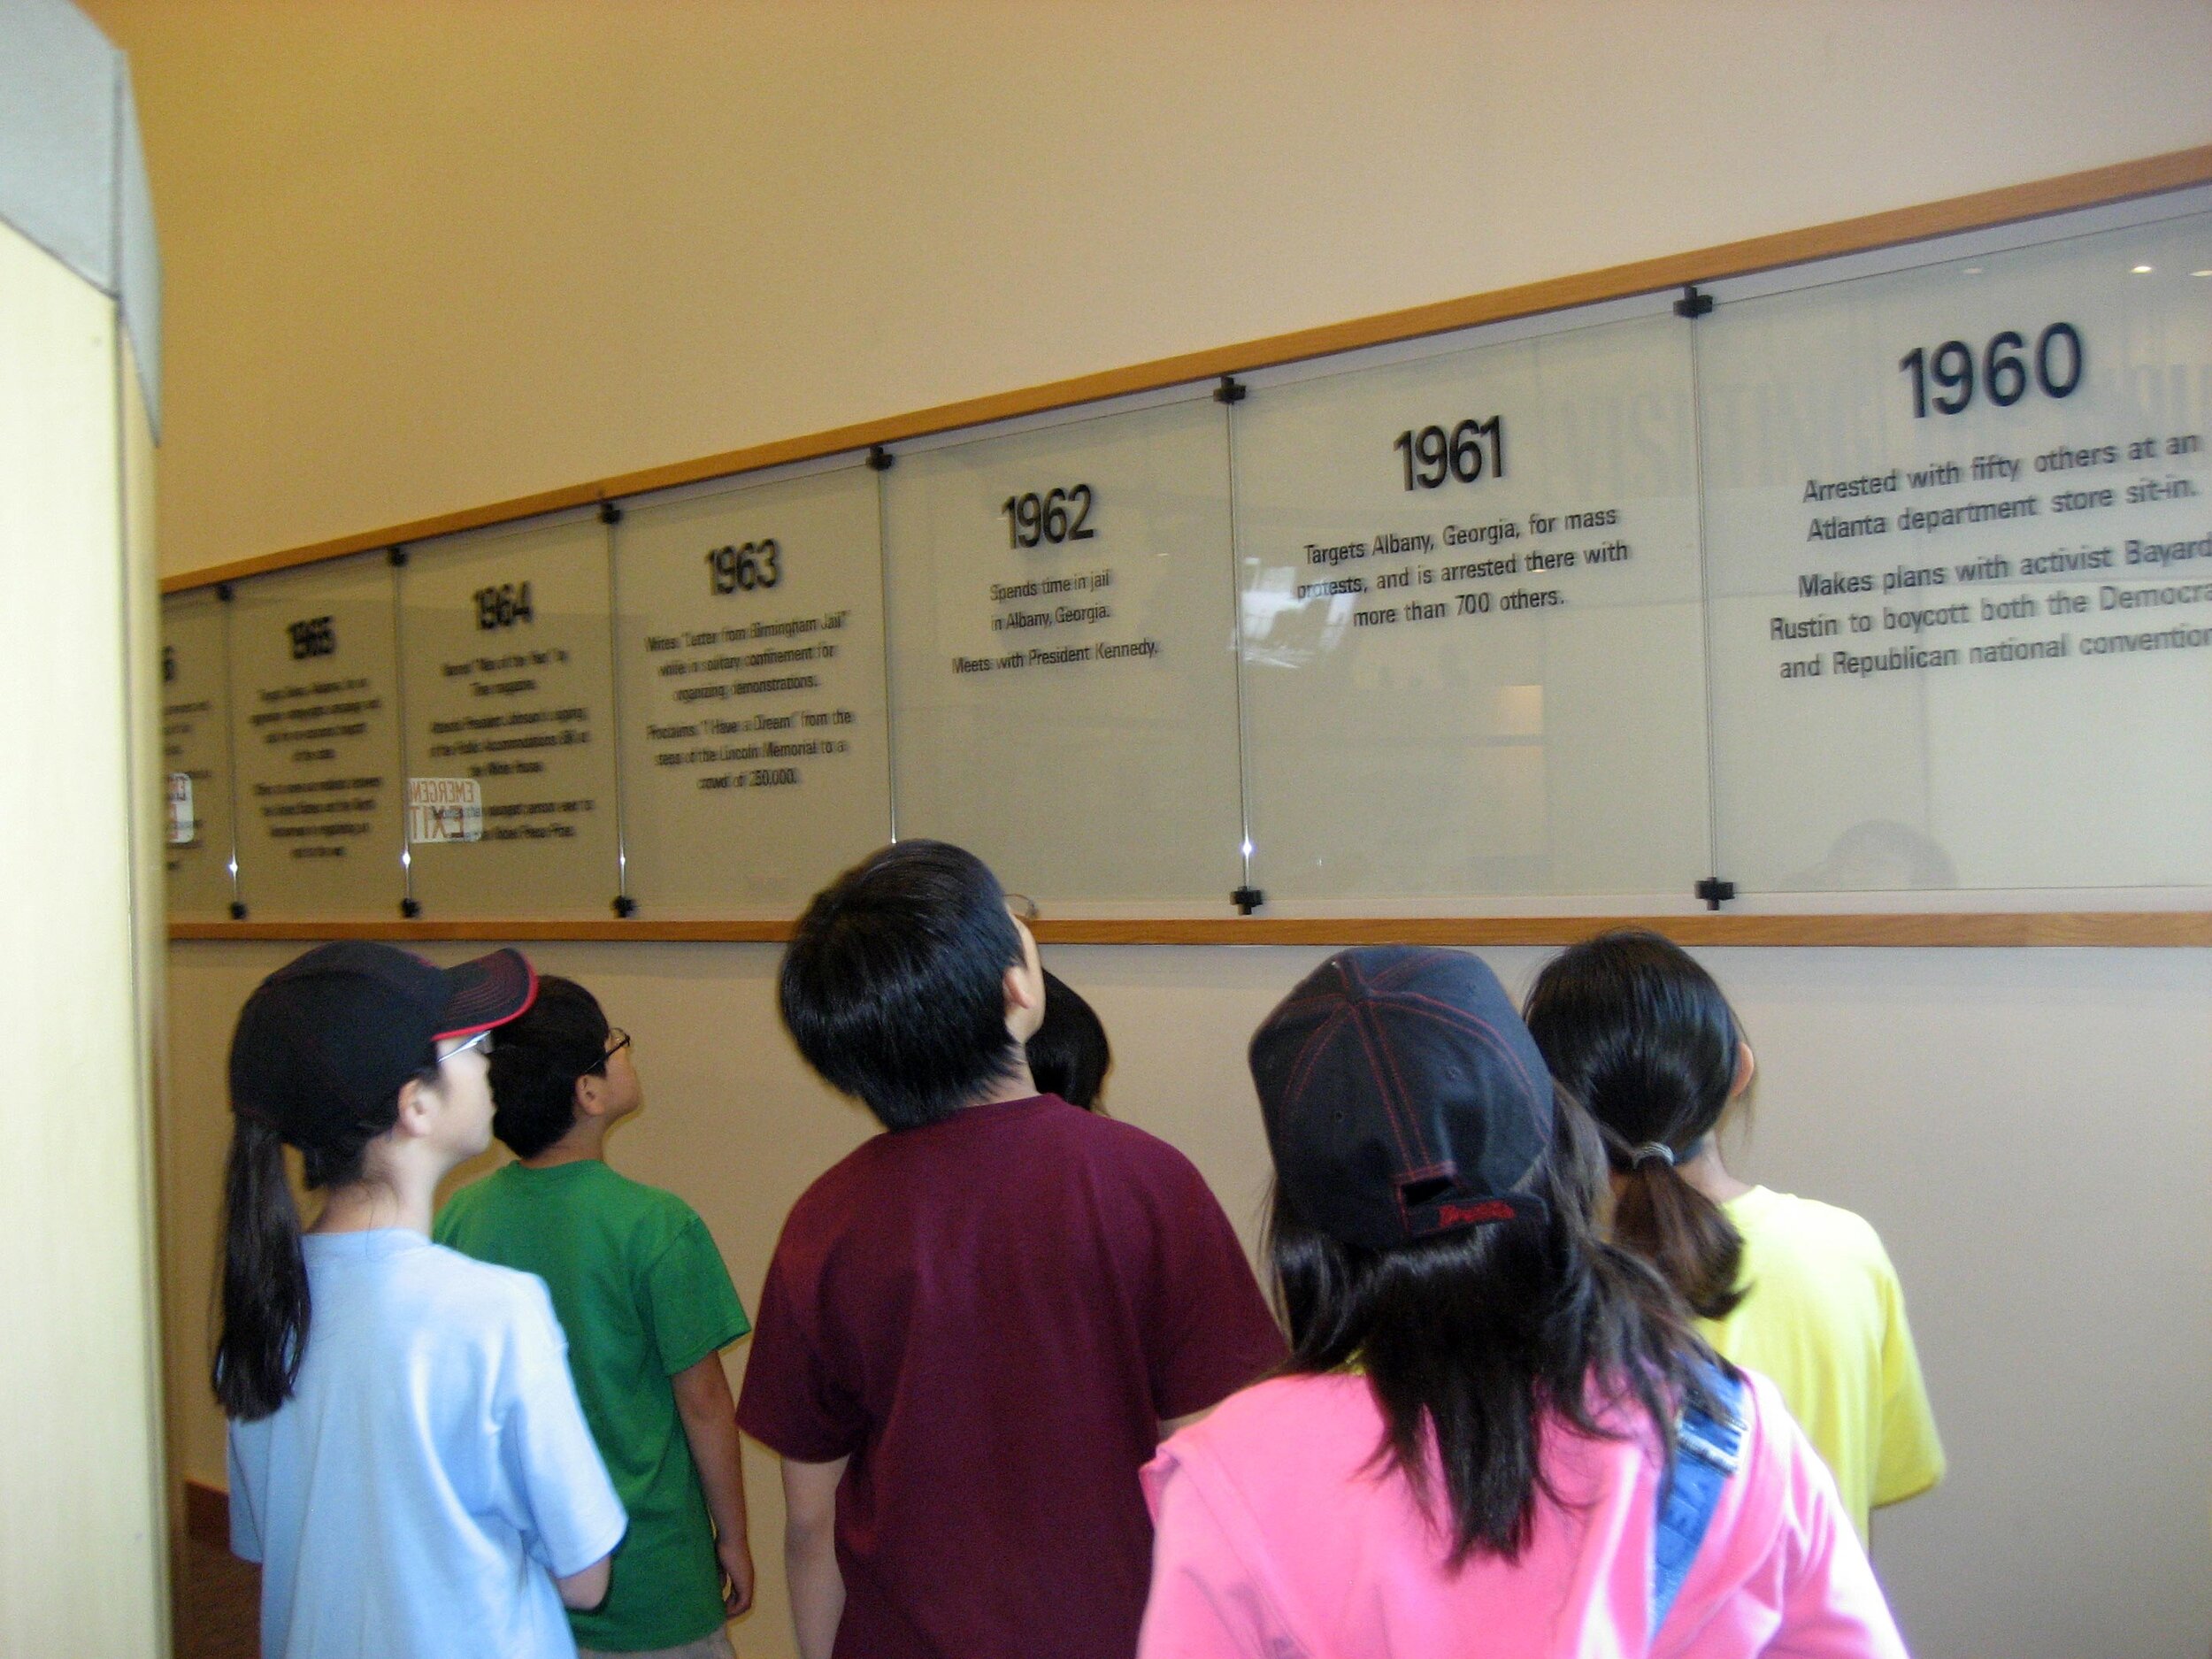  Time Line at the Dr. King Historic Site 